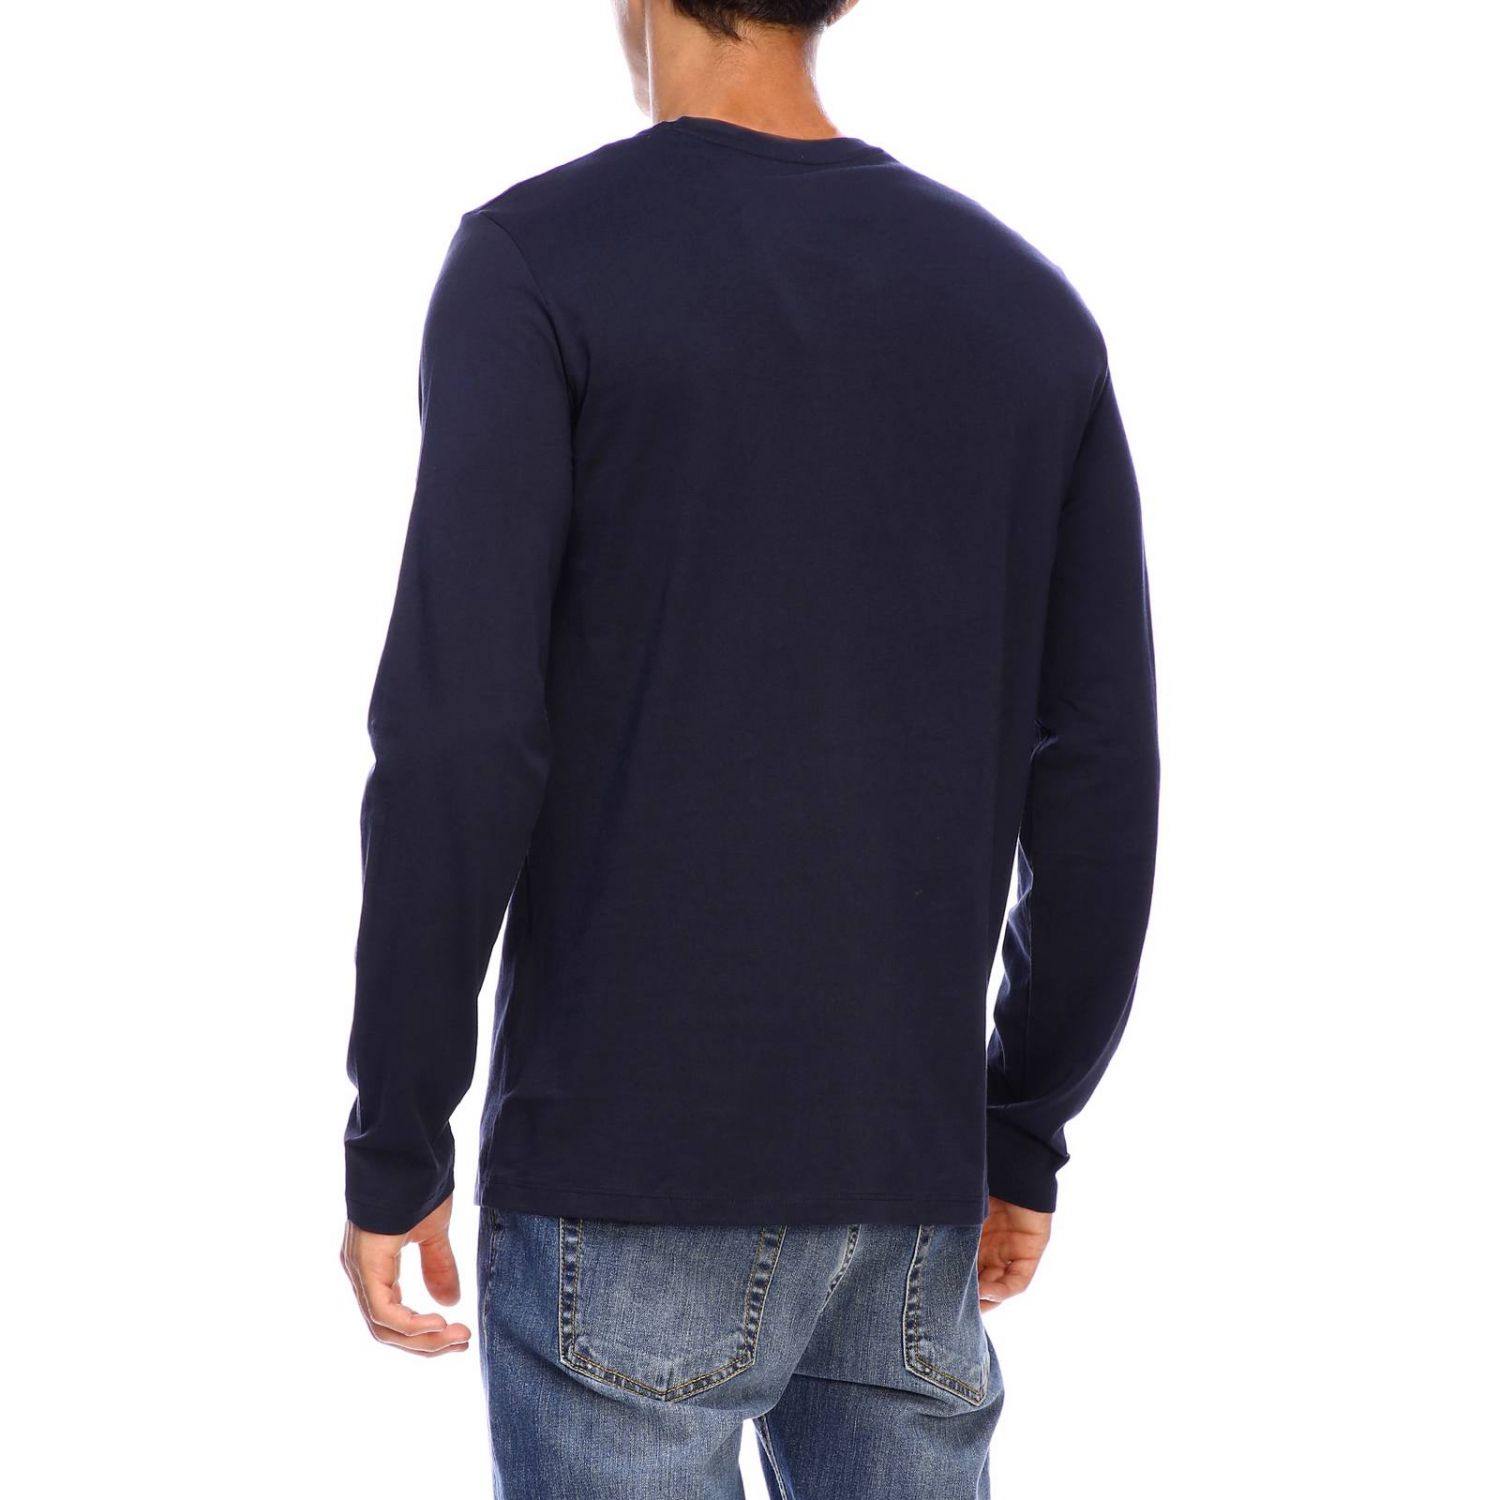 Armani Exchange Outlet: long-sleeved T-shirt - Blue | Armani Exchange t ...